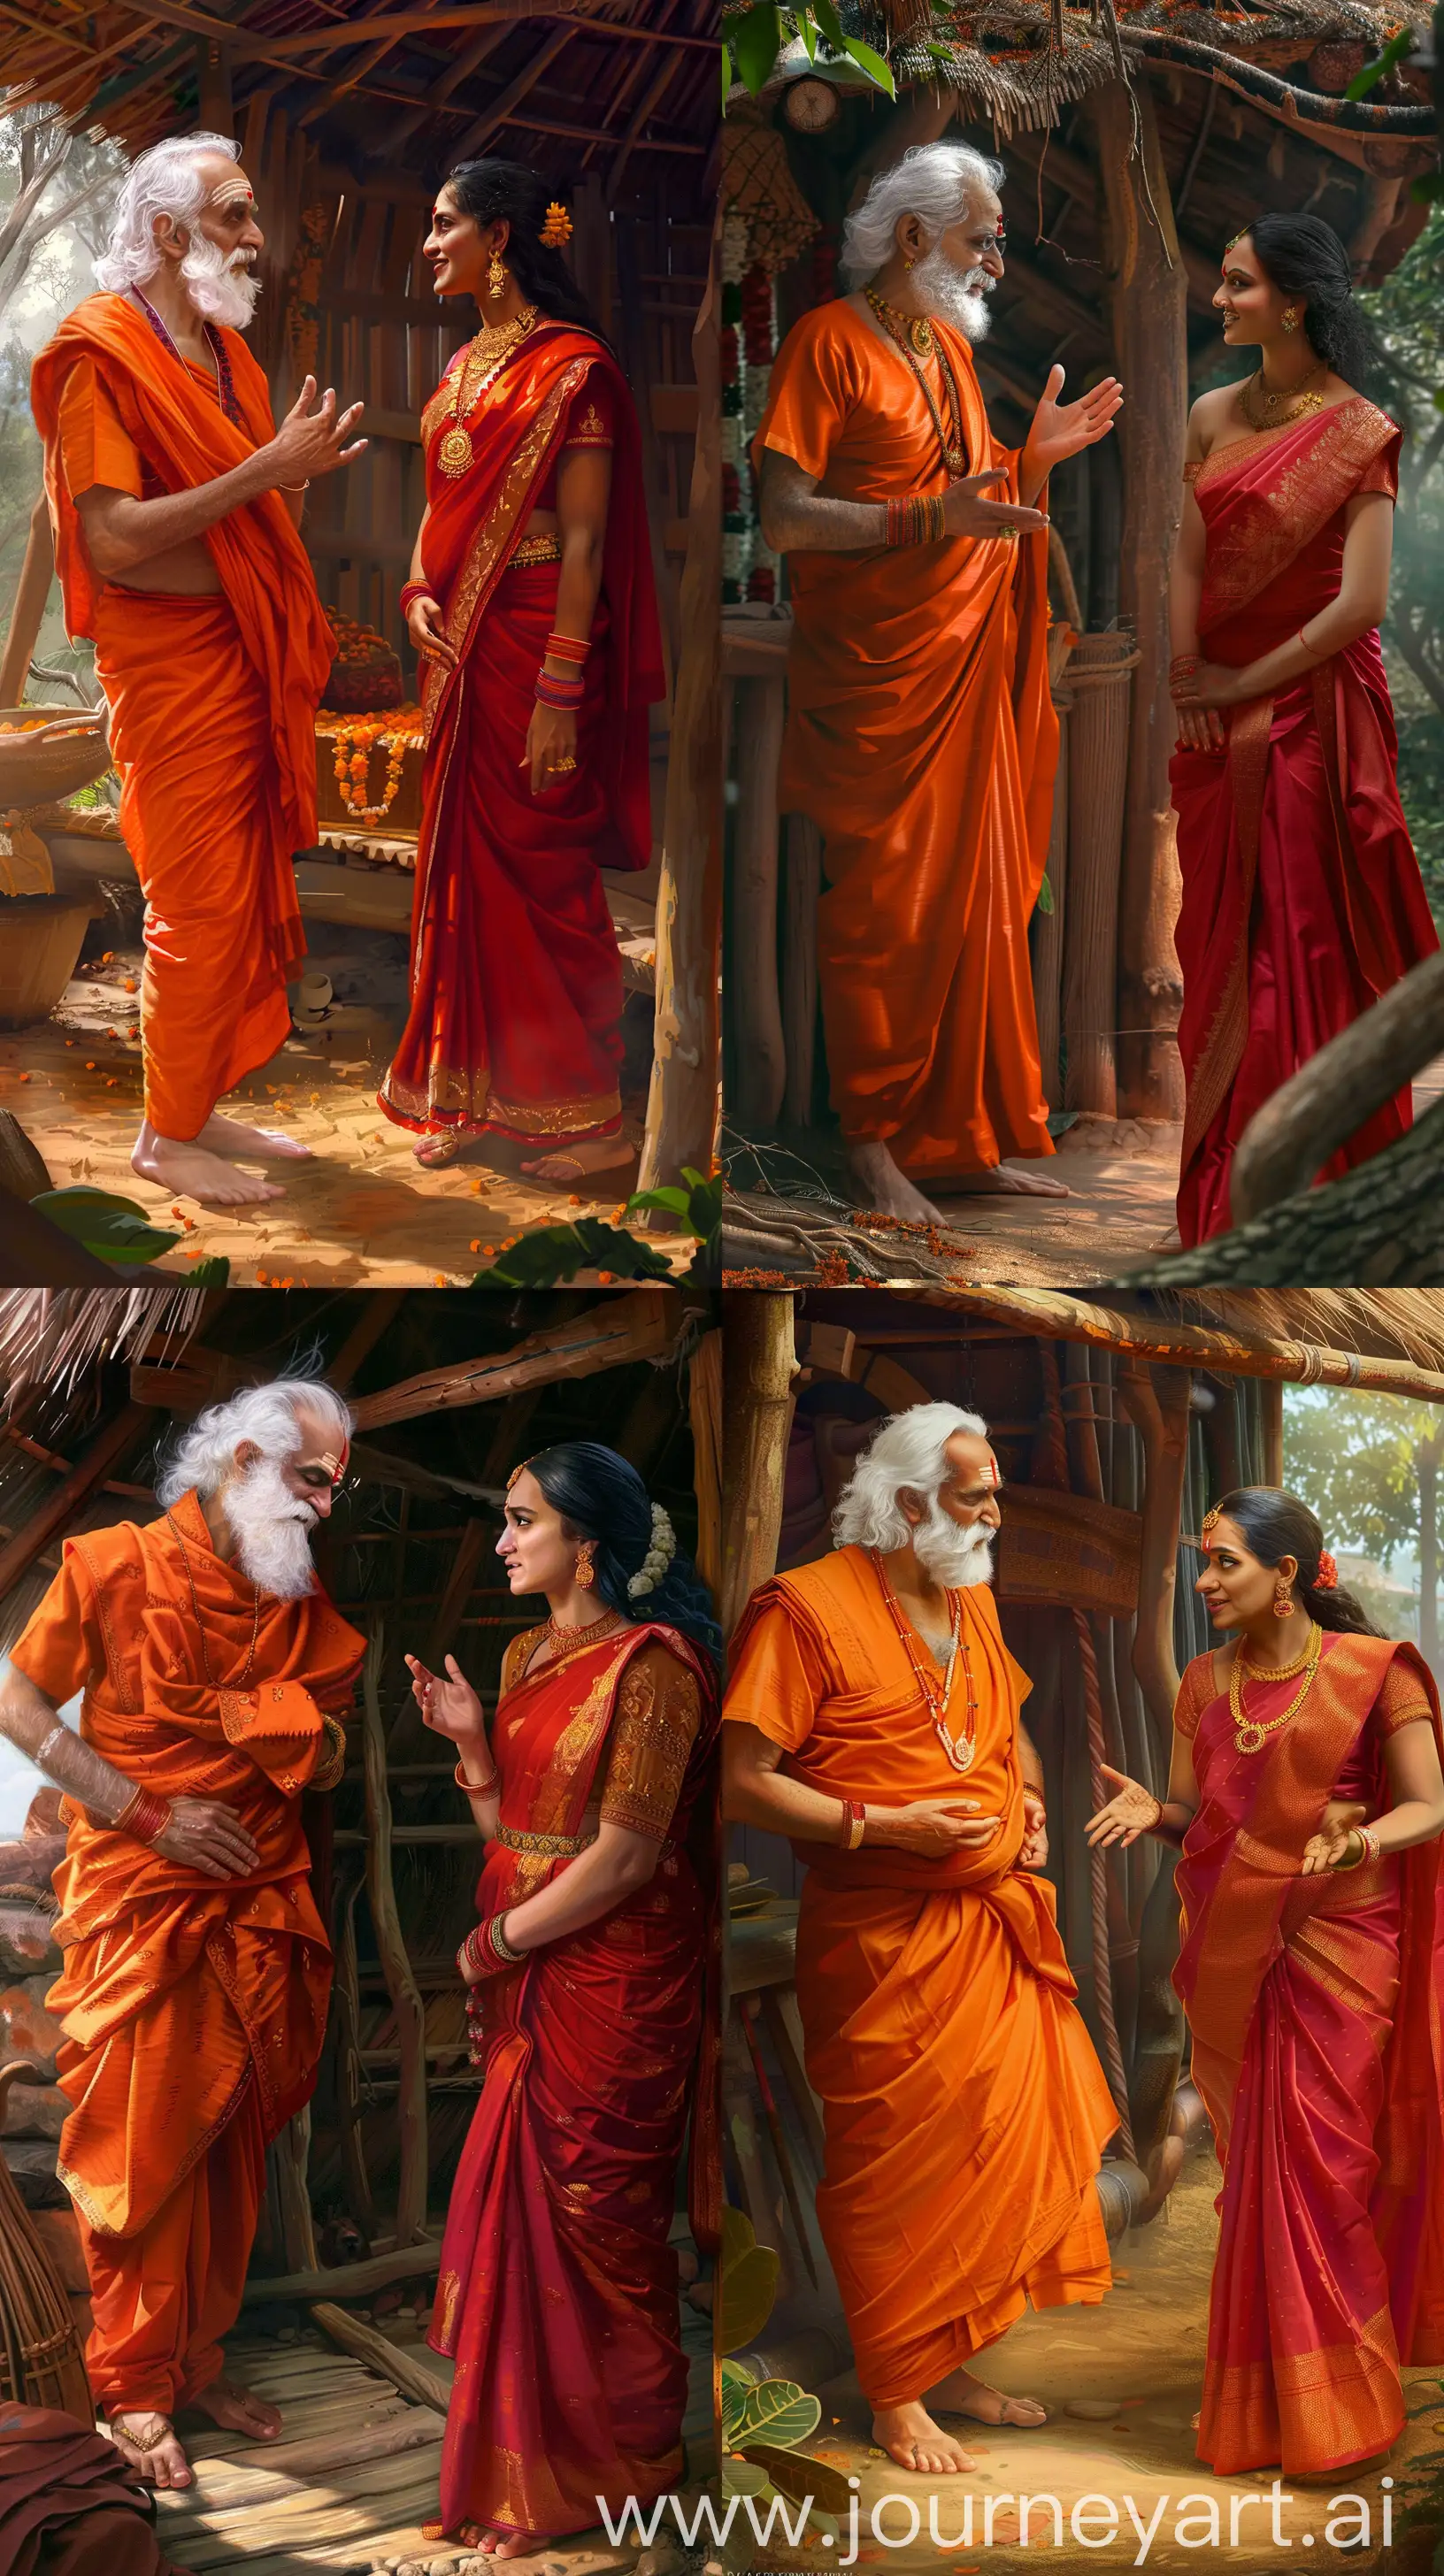 Indian-Sage-in-Orange-Attire-Engaging-in-Conversation-with-Beautiful-Woman-in-Red-Saree-Inside-Vibrant-Hut